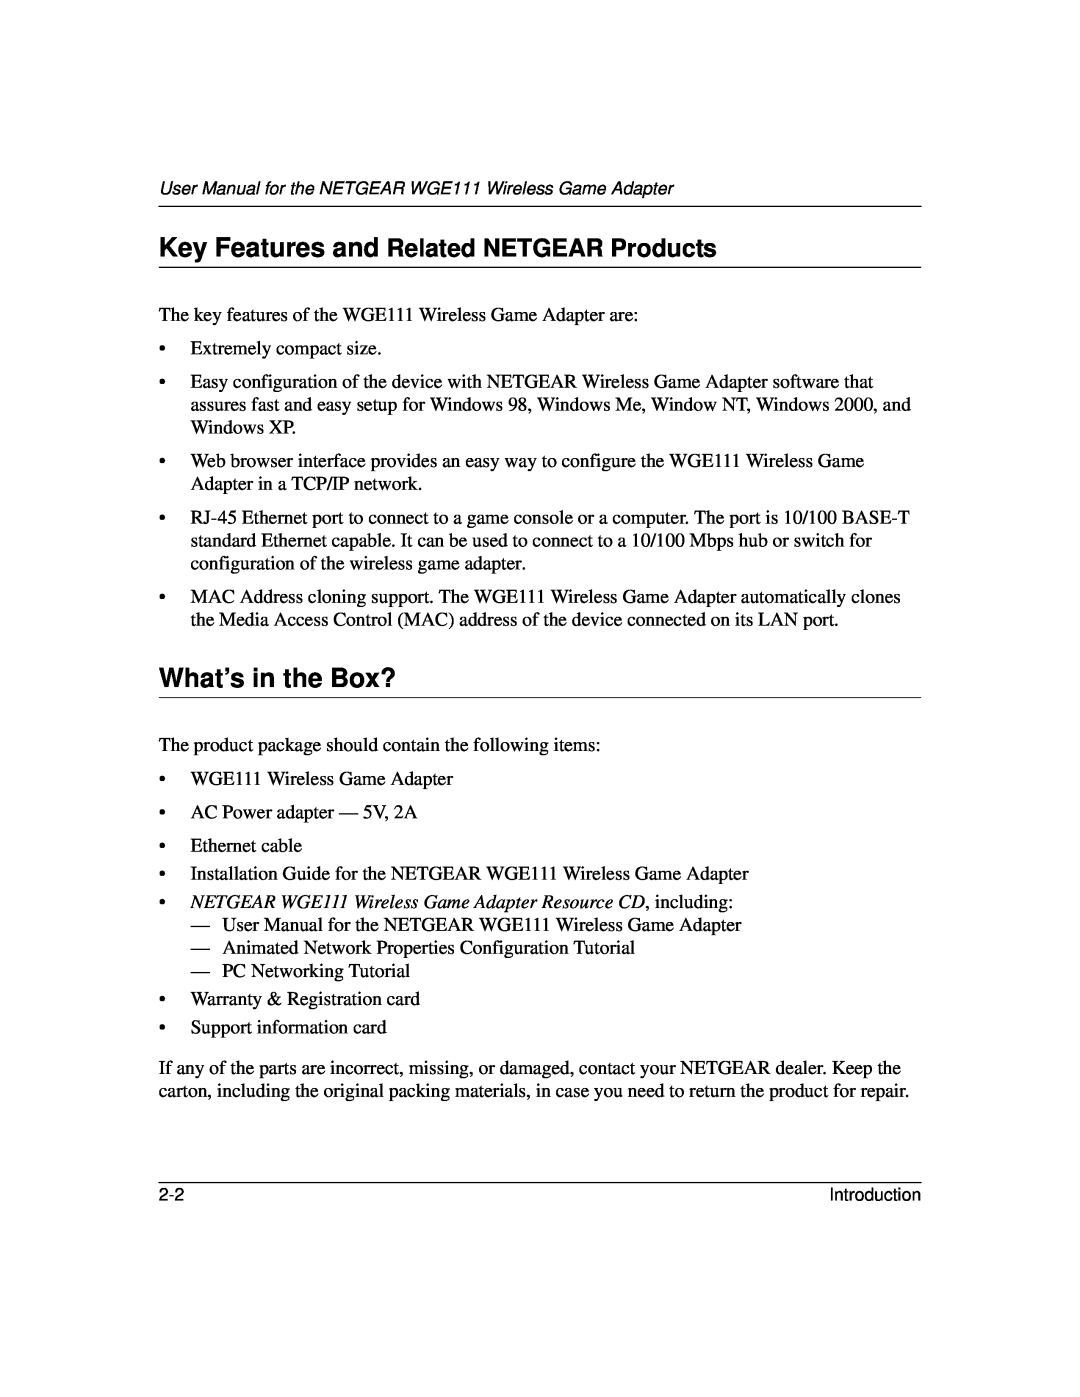 NETGEAR WGE111 user manual What’s in the Box?, Key Features and Related NETGEAR Products 